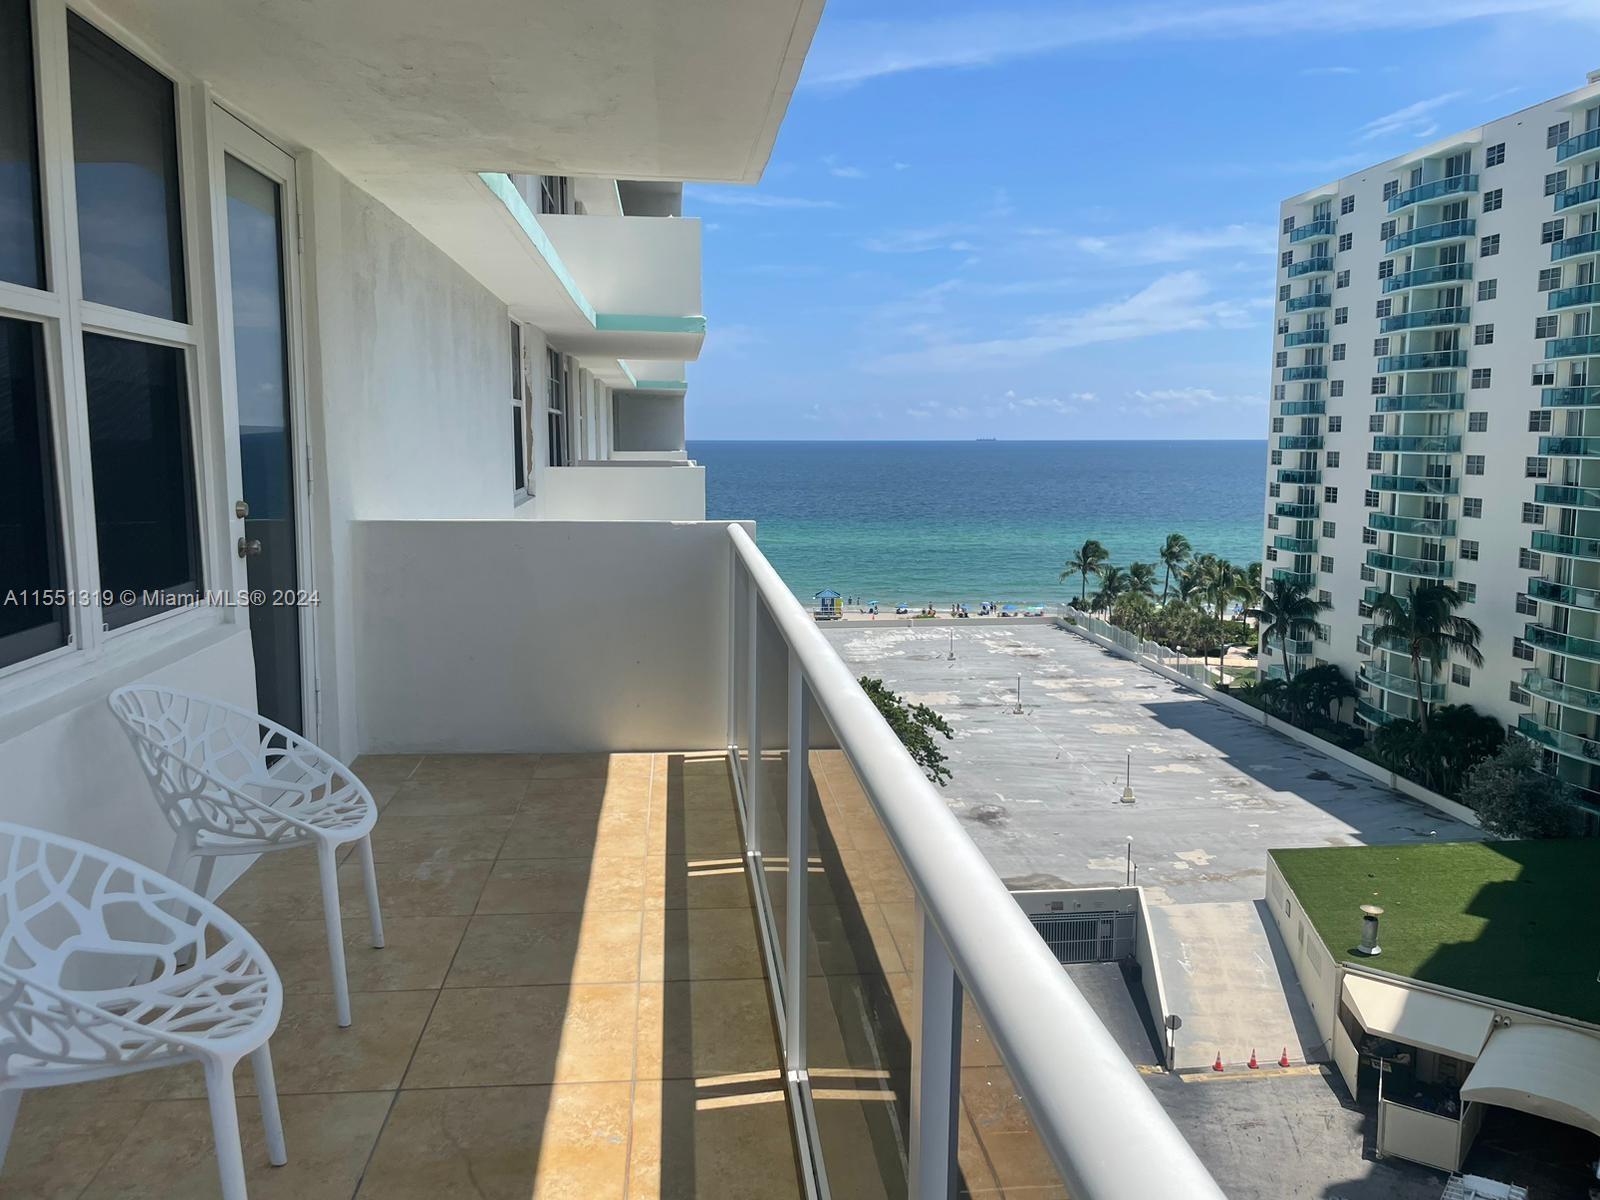 Photo of 3725 S Ocean Dr #924 in Hollywood, FL